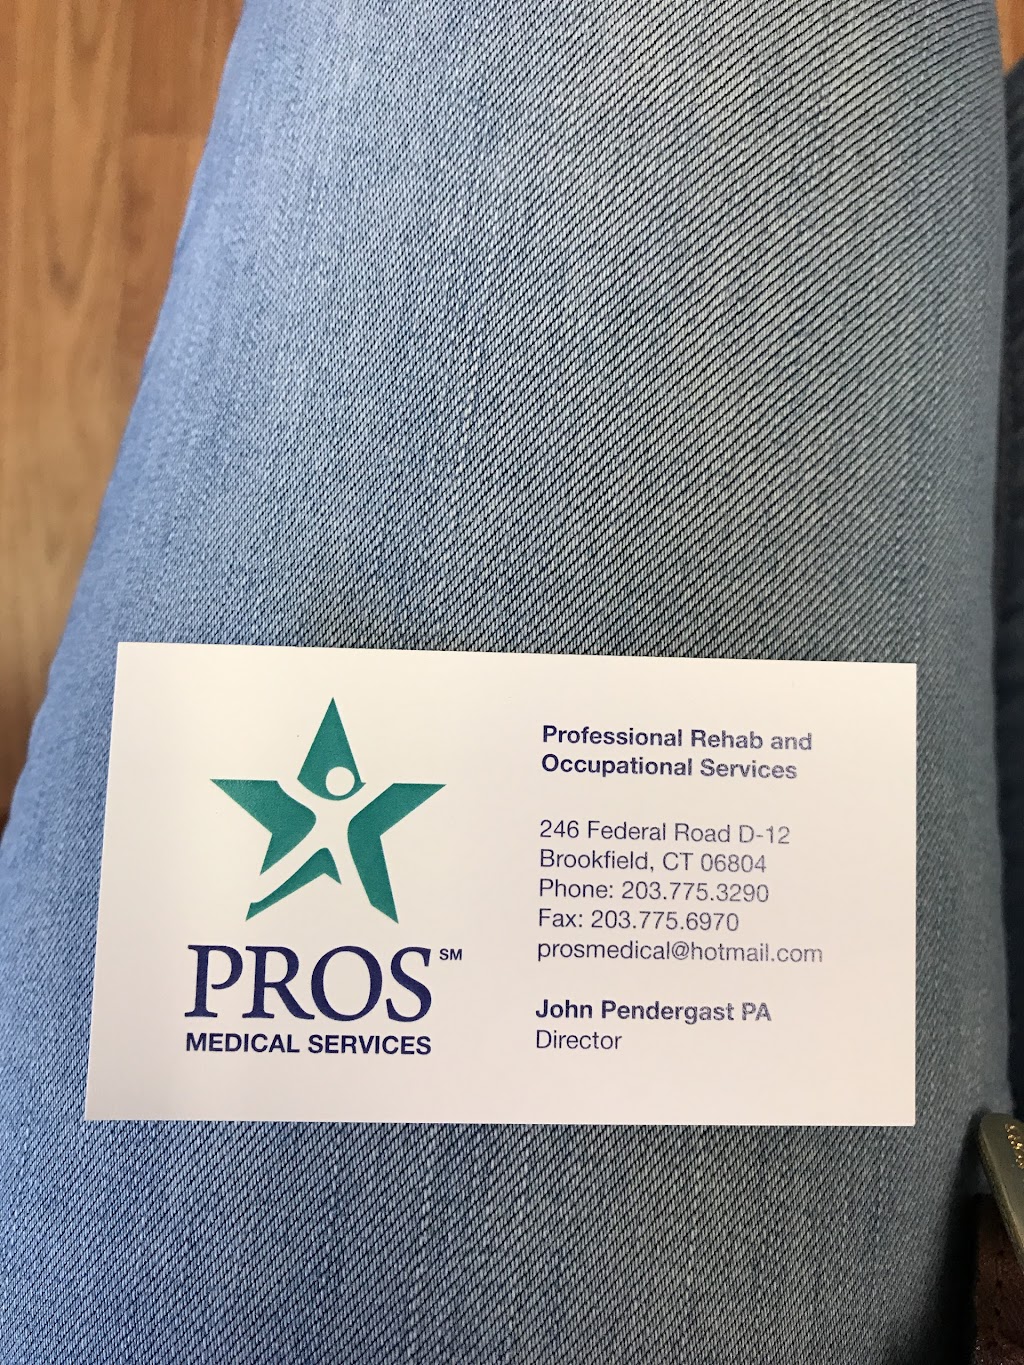 PROS MEDICAL SERVICES | 246 Federal Rd, Brookfield, CT 06804 | Phone: (203) 775-3290